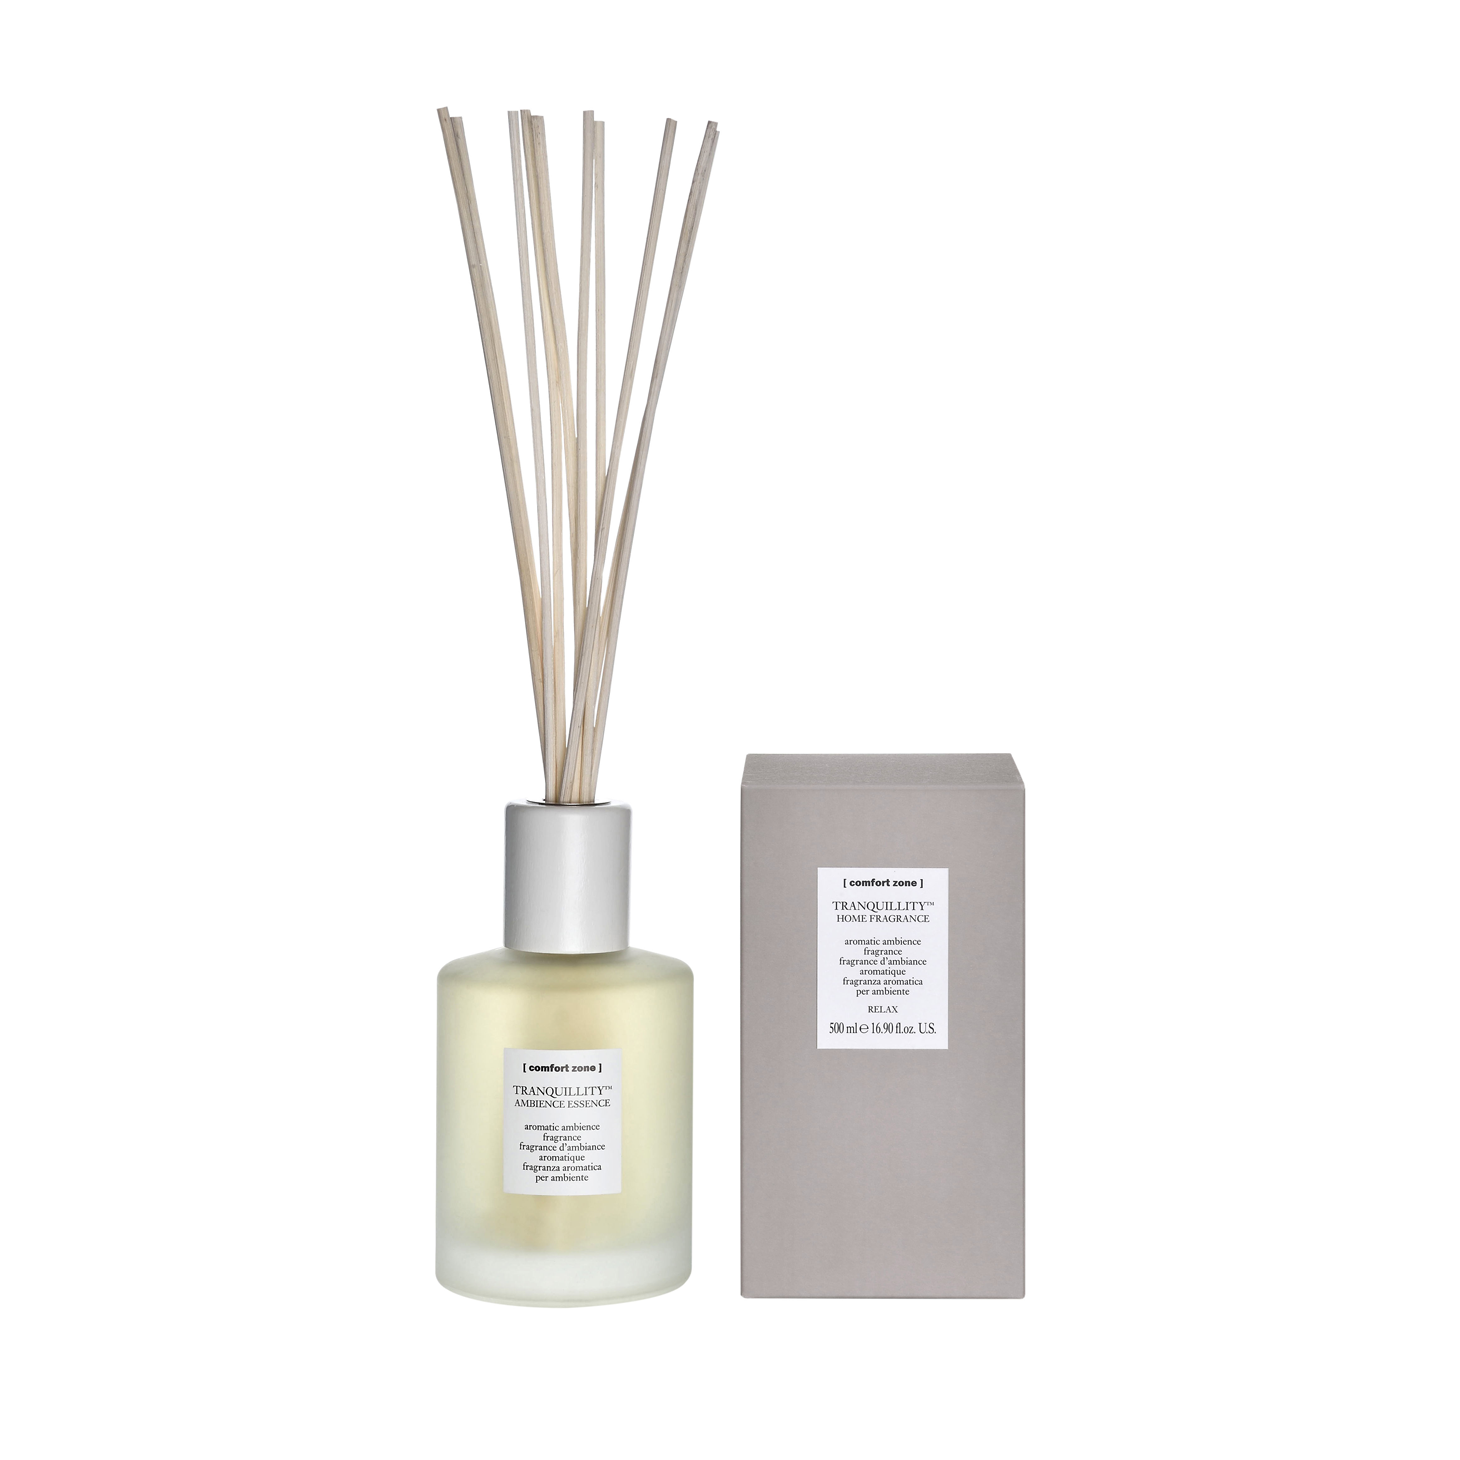 Tranquillity Home Fragrance (with reeds)